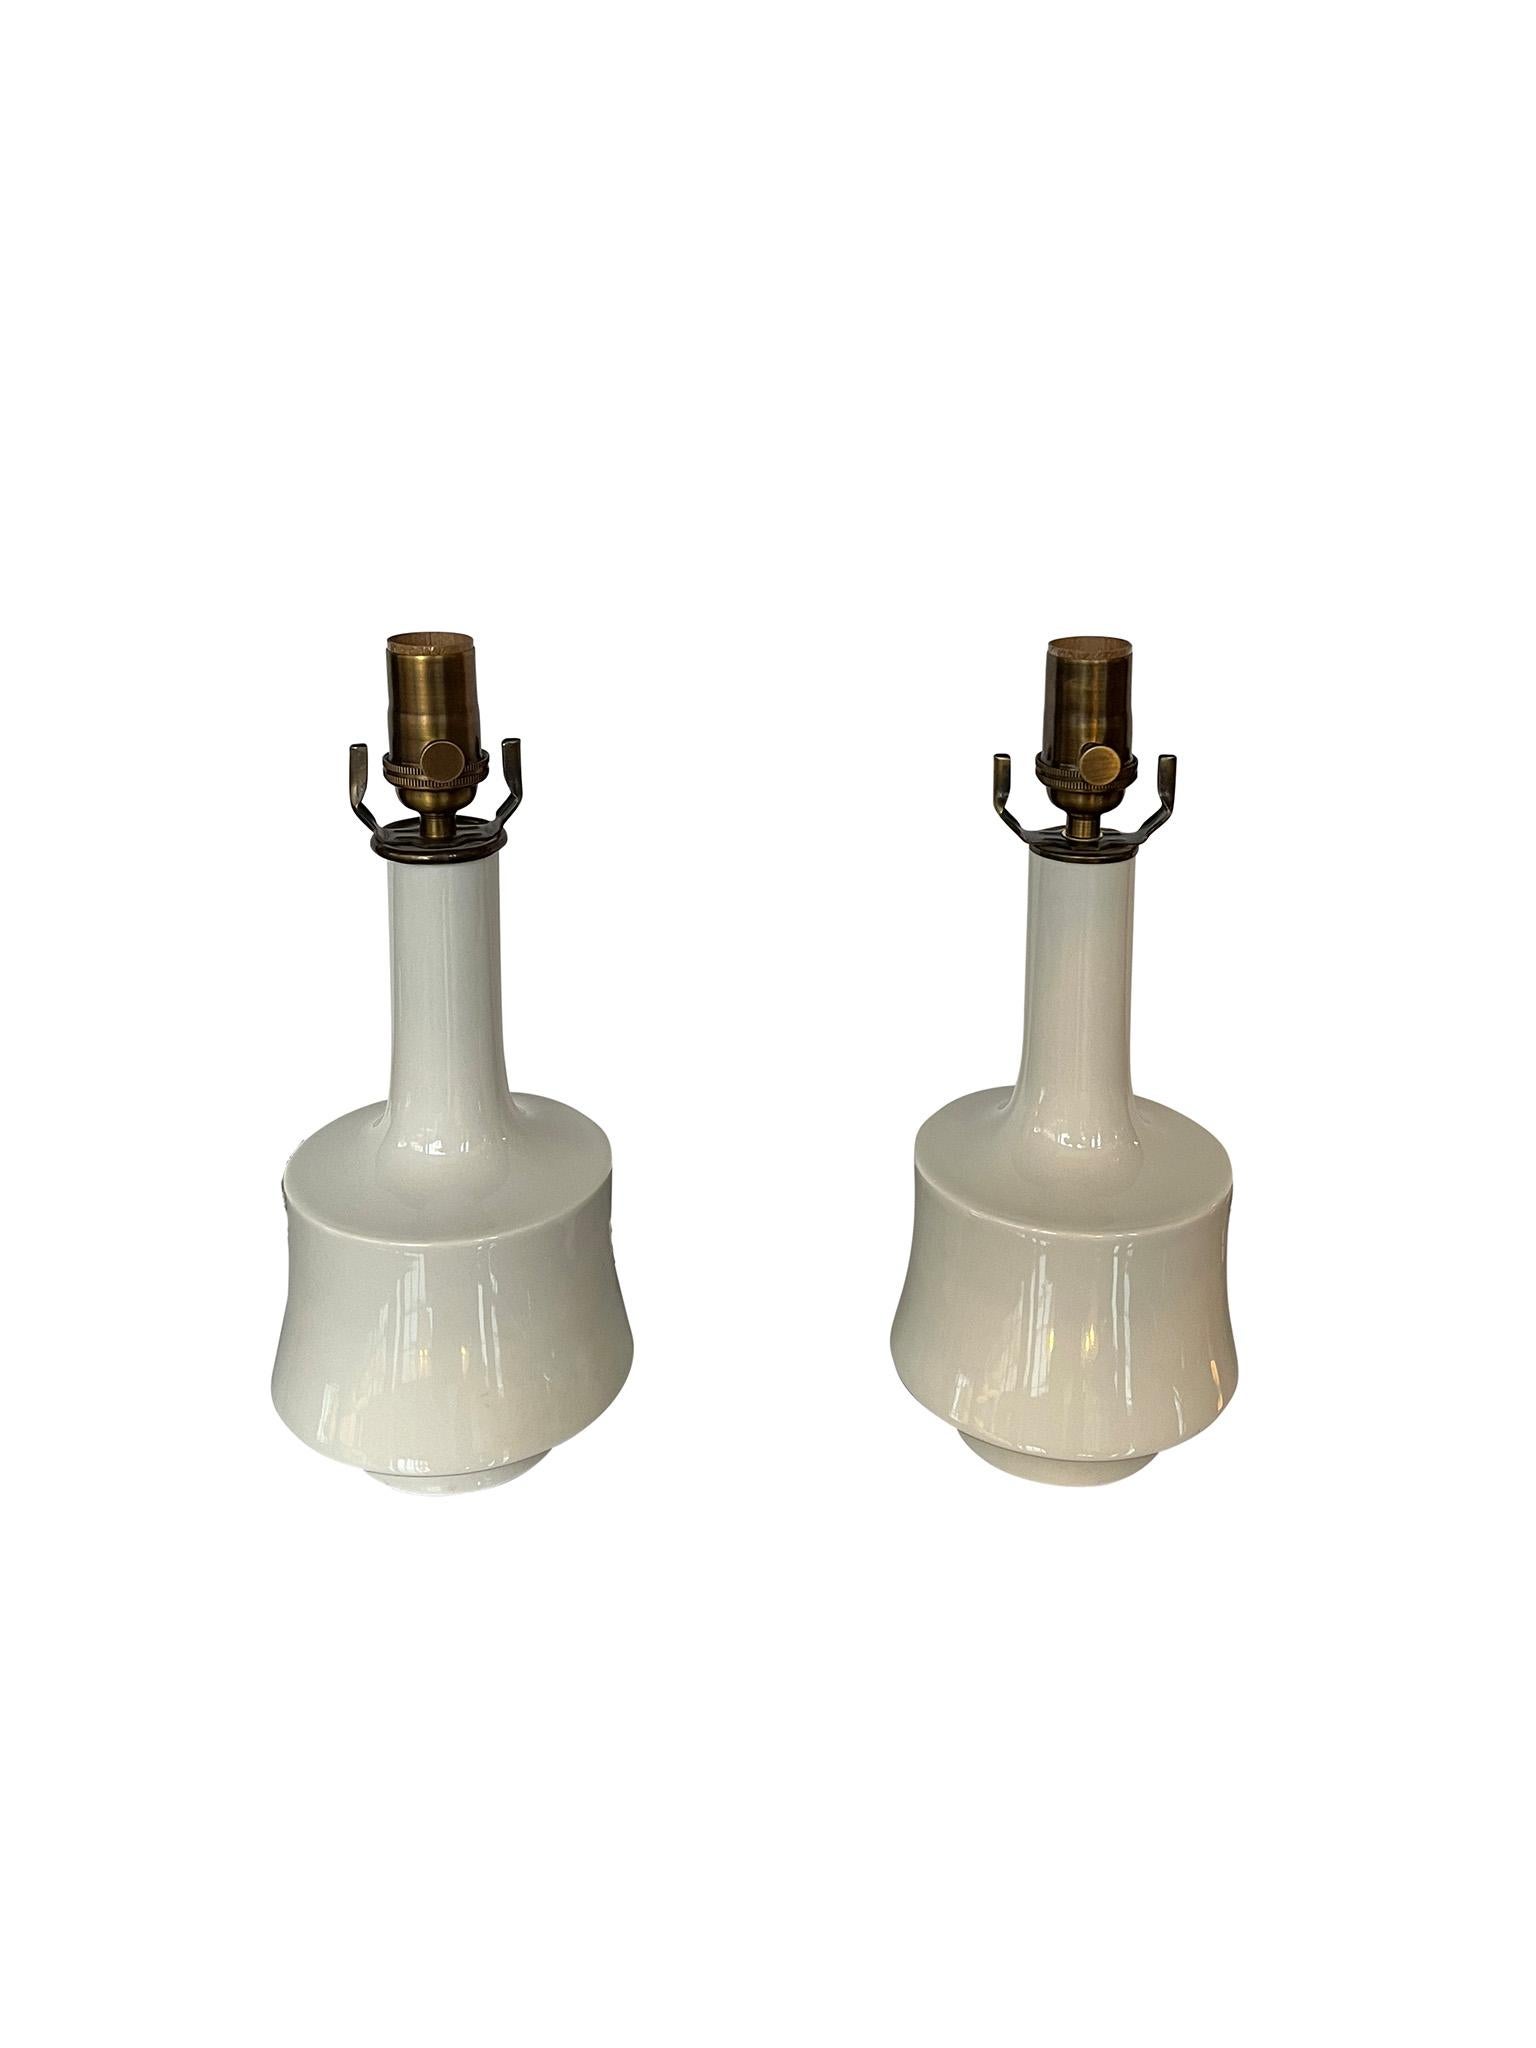 Charming pair of small 1960s midcentury white porcelain table lamps, manufactured in Bavaria, Germany. A perfect addition to any bedside table, these lamps are newly rewired and fitted with complementing white cotton-linen bell lampshades. Marked